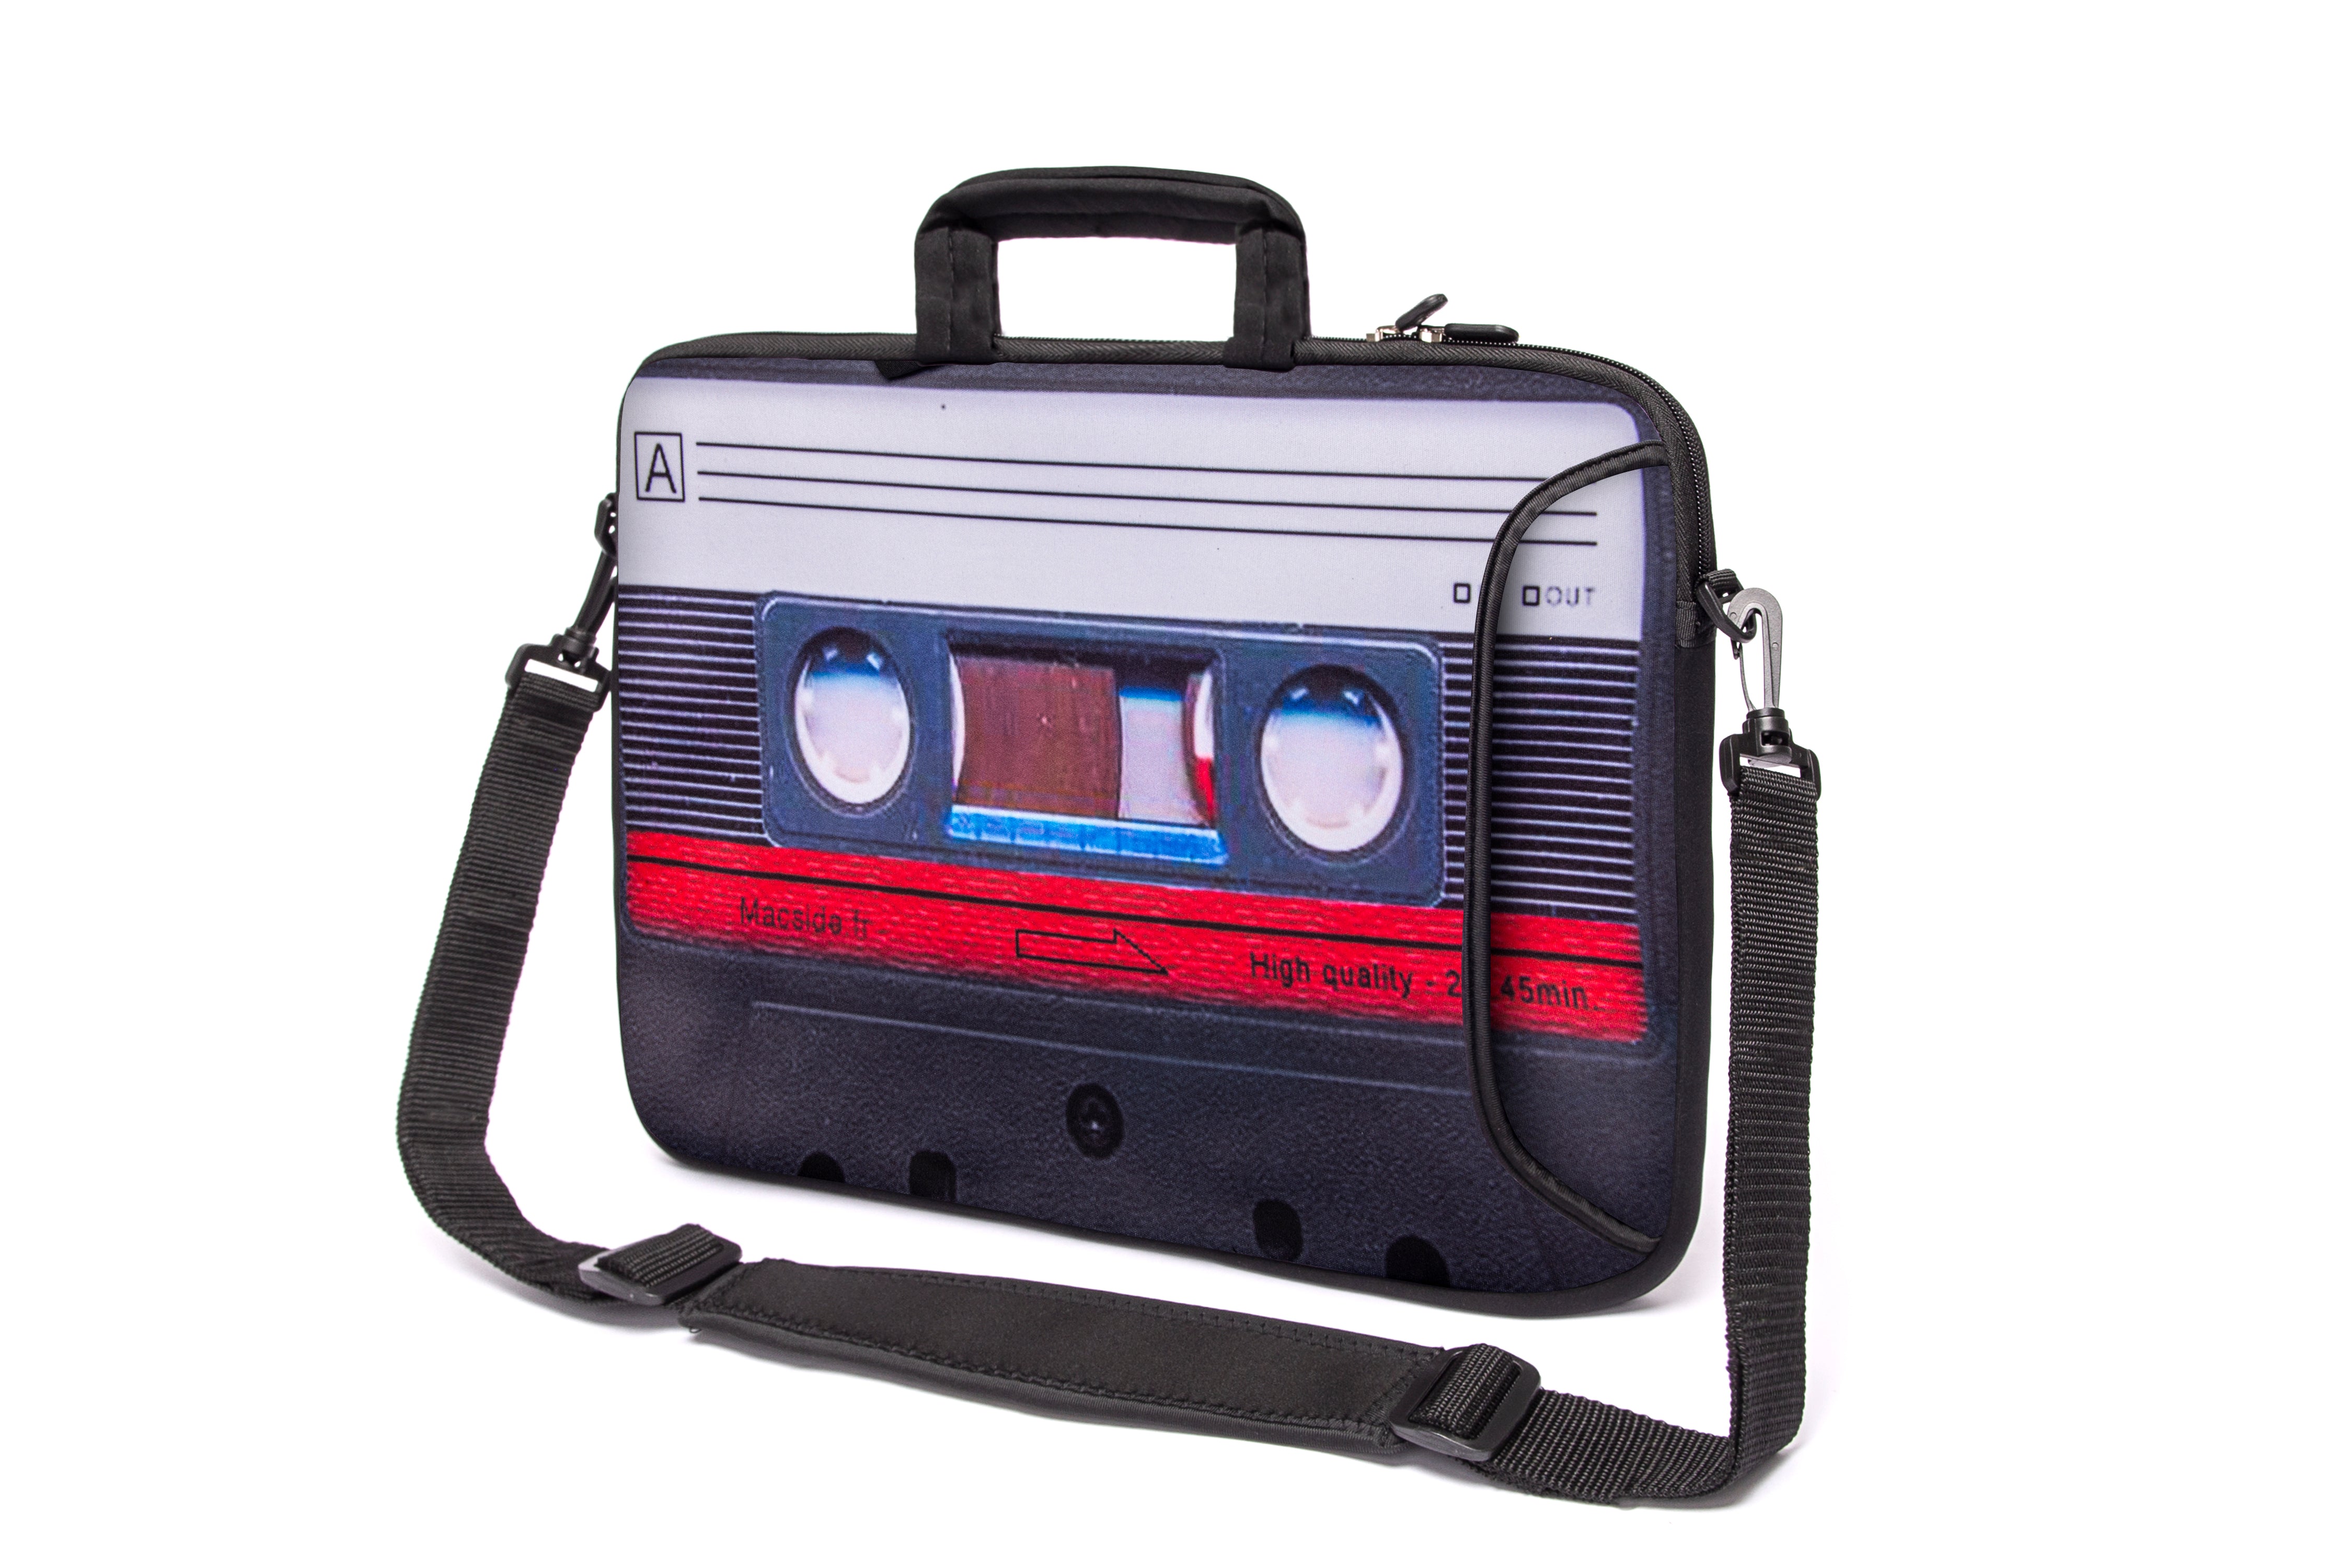 17"- 17.3" (inch) LAPTOP BAG/CASE WITH HANDLE & STRAP, NEOPRENE MADE FOR LAPTOPS/NOTEBOOKS, ZIPPED*CASSETTE*